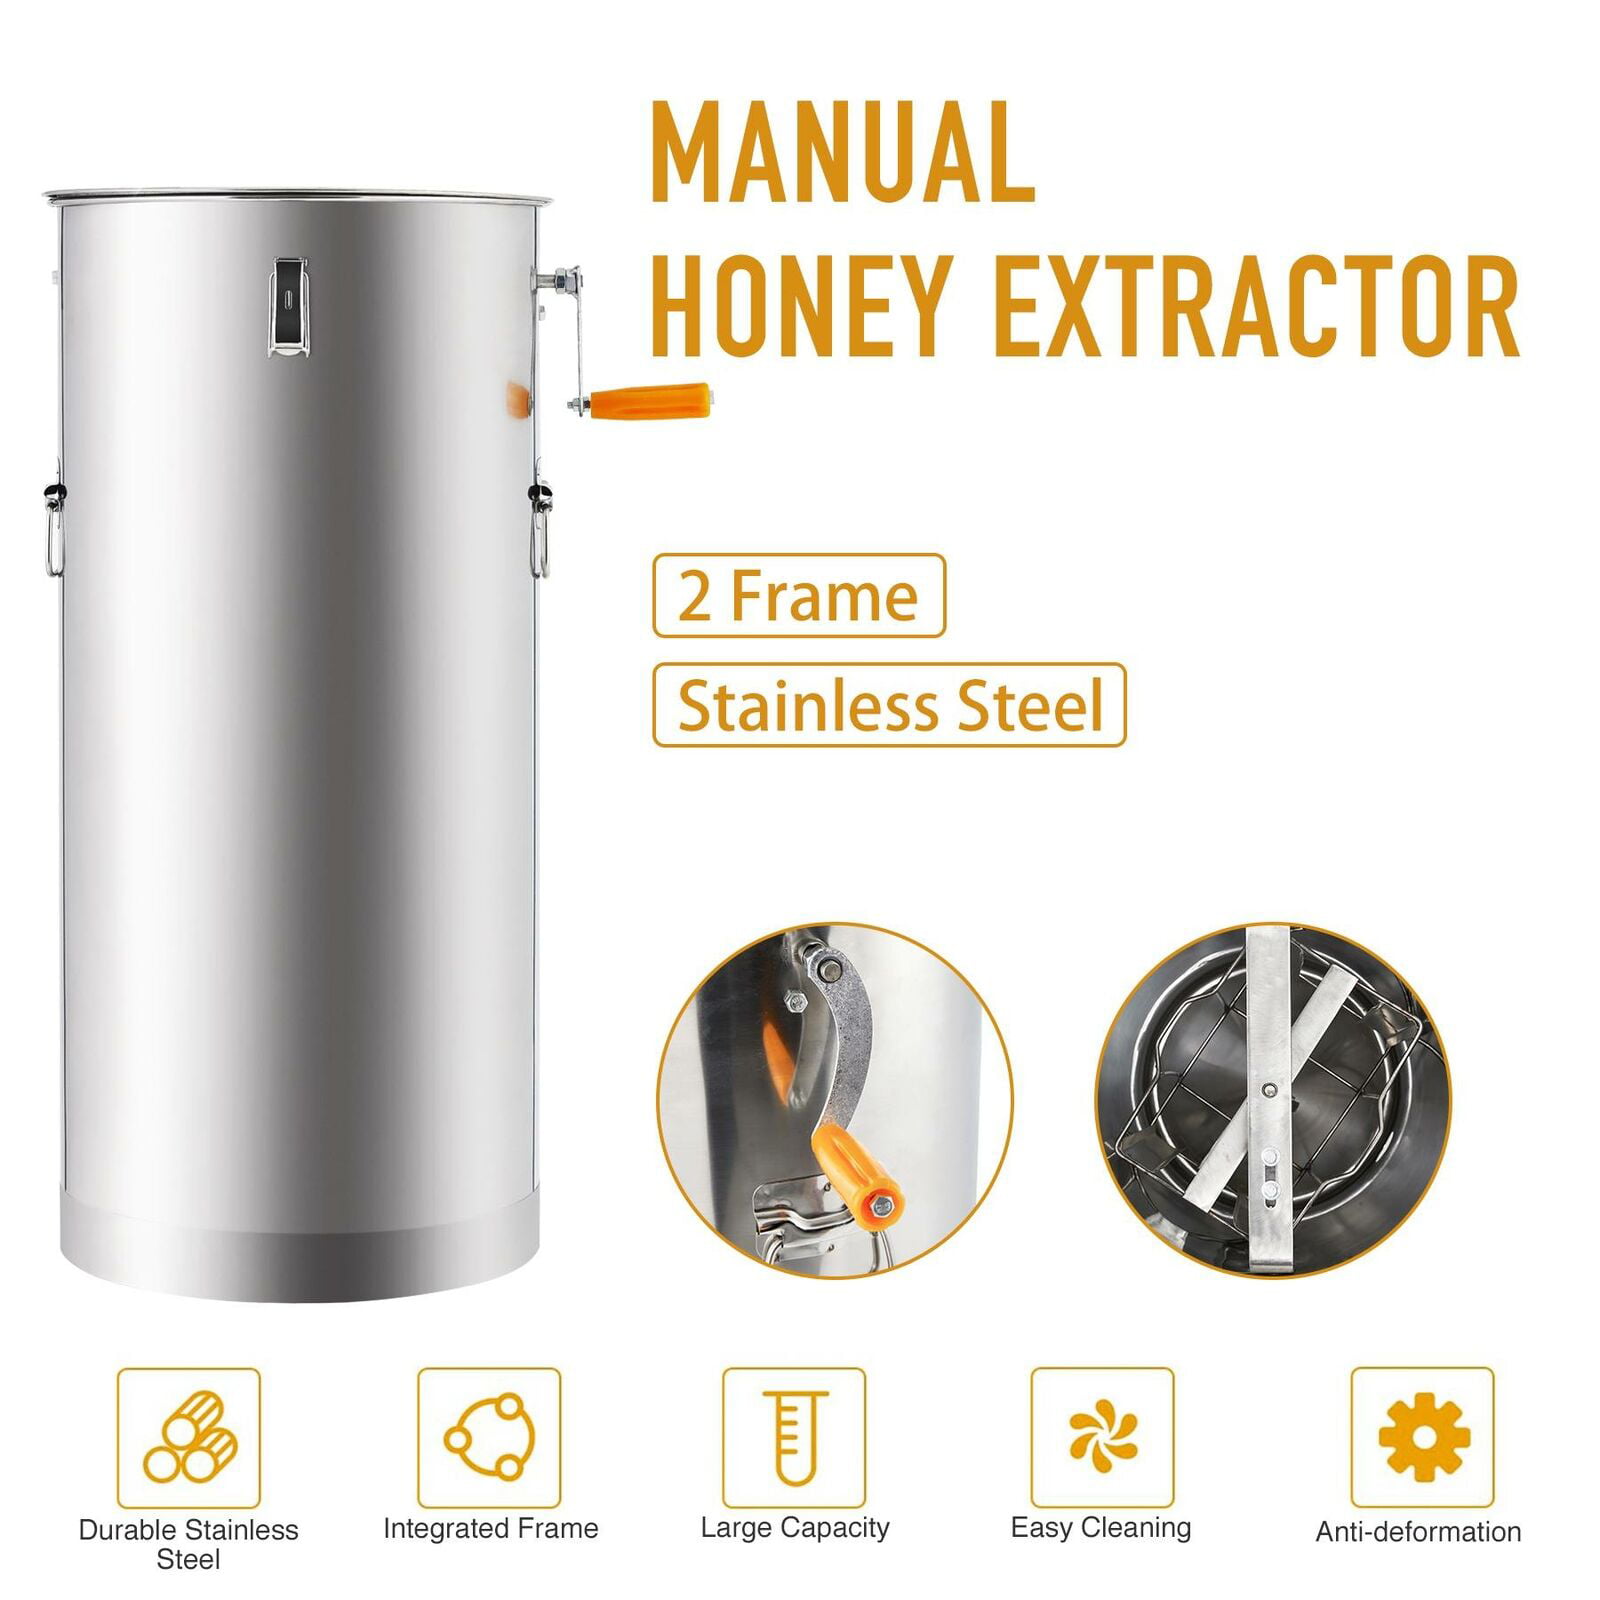 Details about   Manual Honey Extractor Beekeeping Equipment Hand Crank Drum Honeycomb 2-Frame SS 